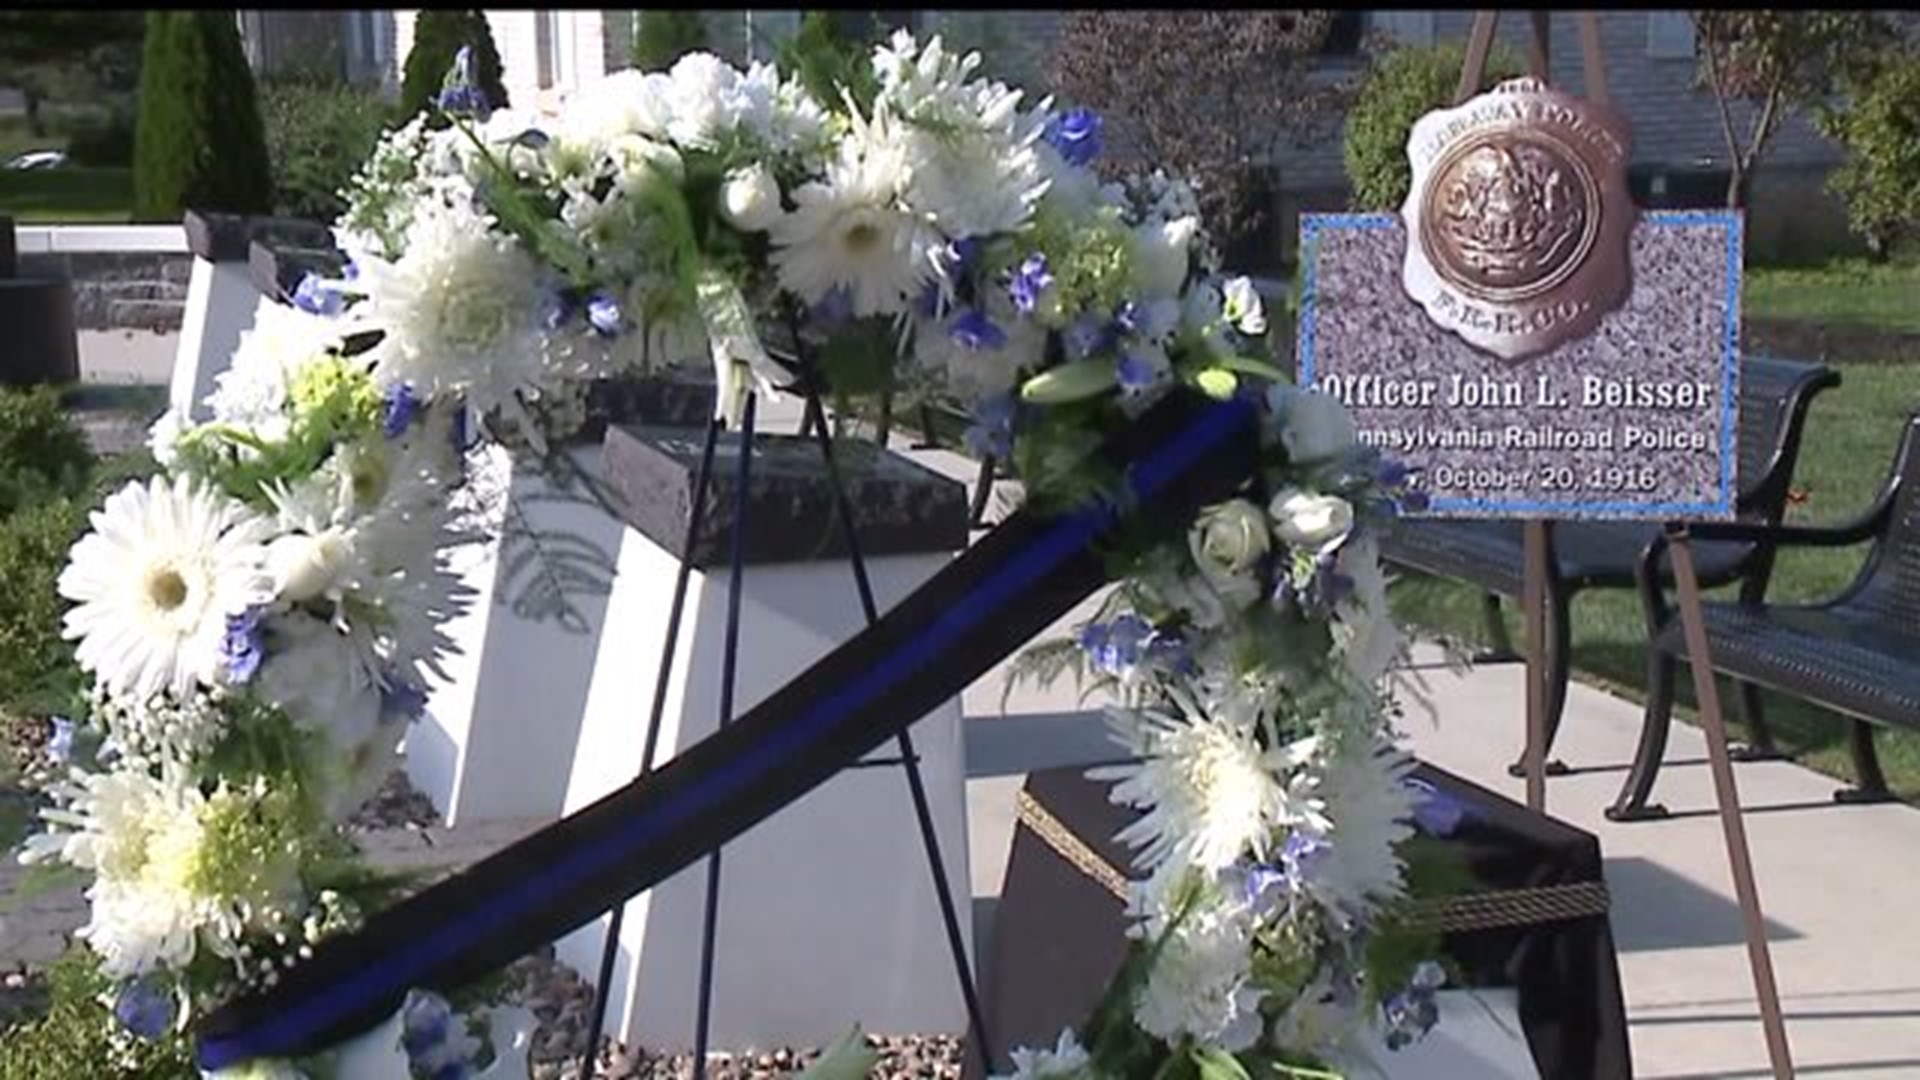 Name dedication at the `Line of Duty Deaths` in Cumberland County